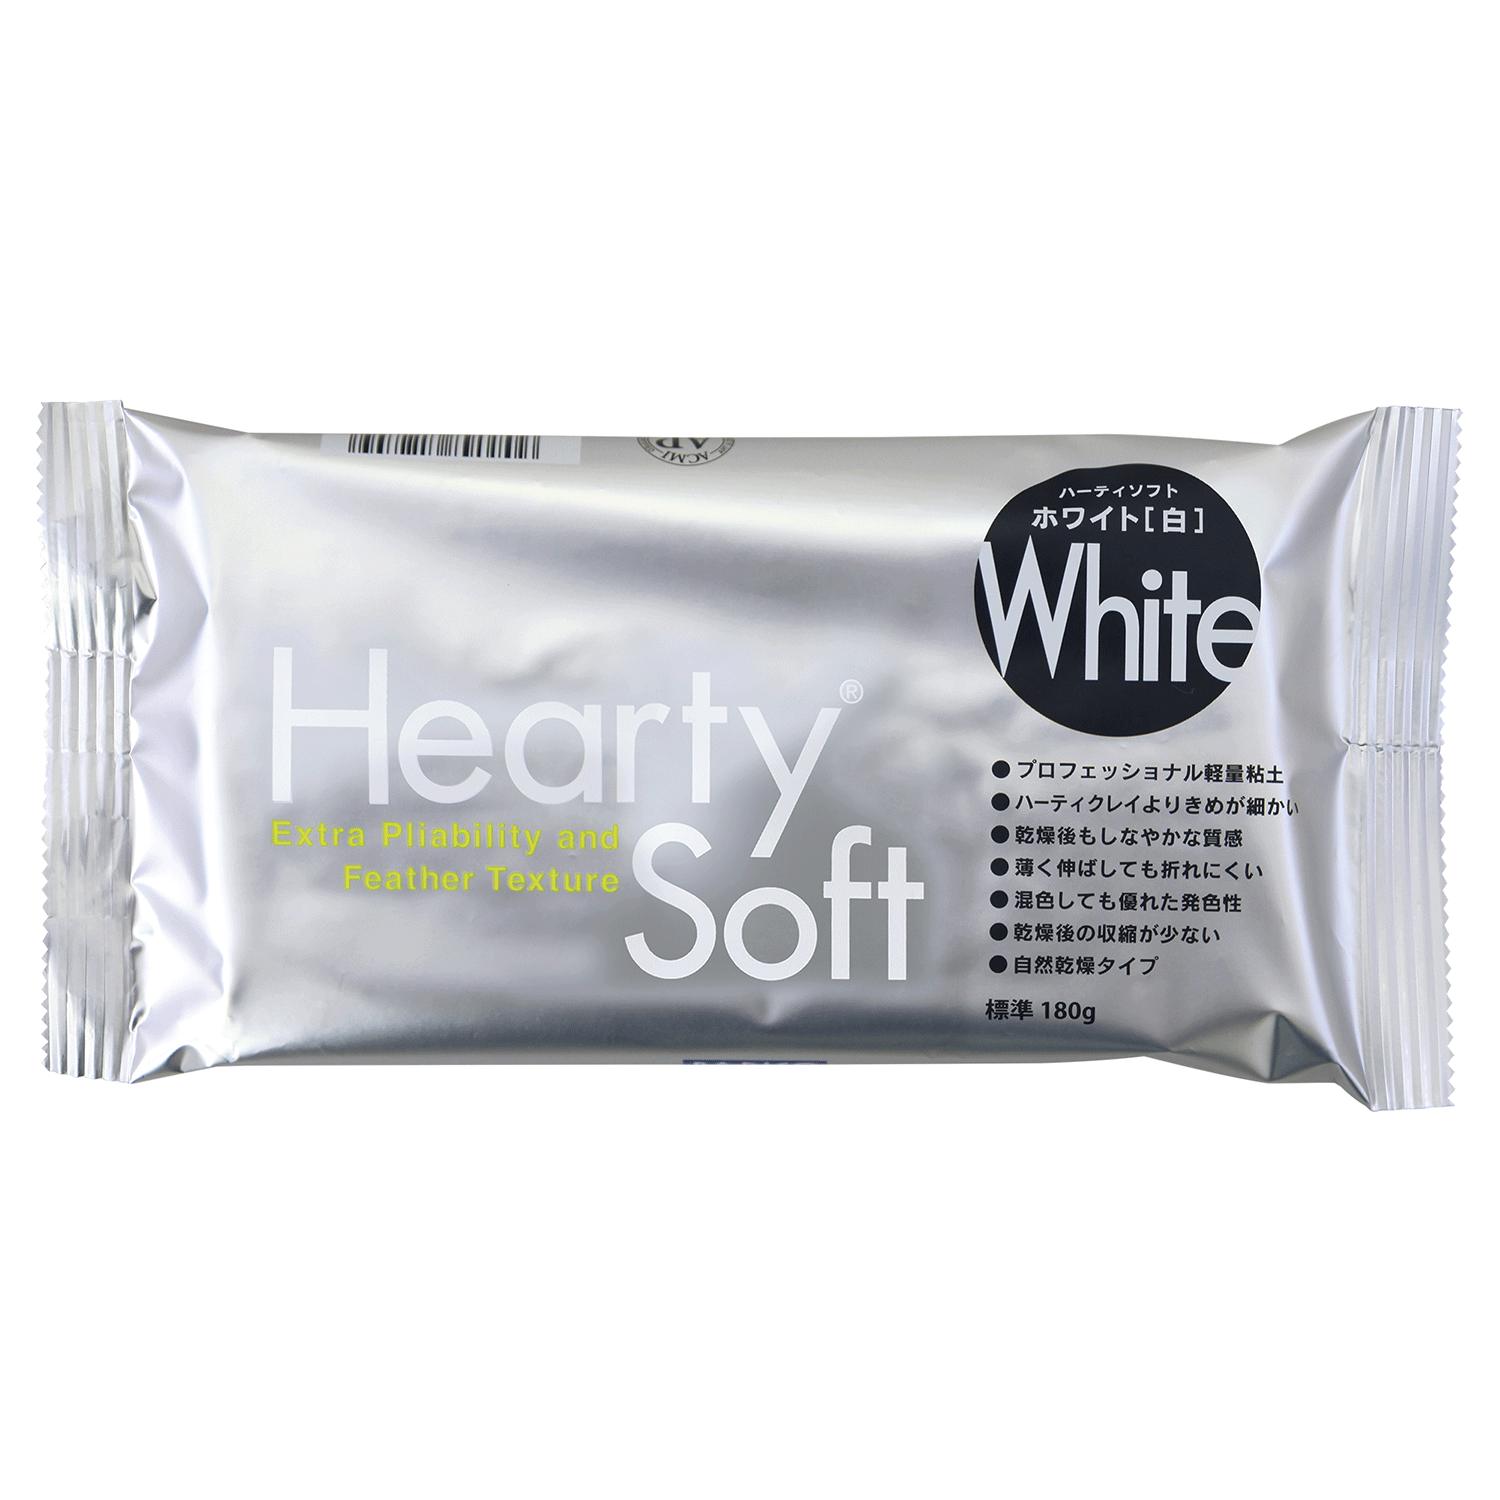 PDC1270 Hearty Soft Resin Clay 180g (pcs)